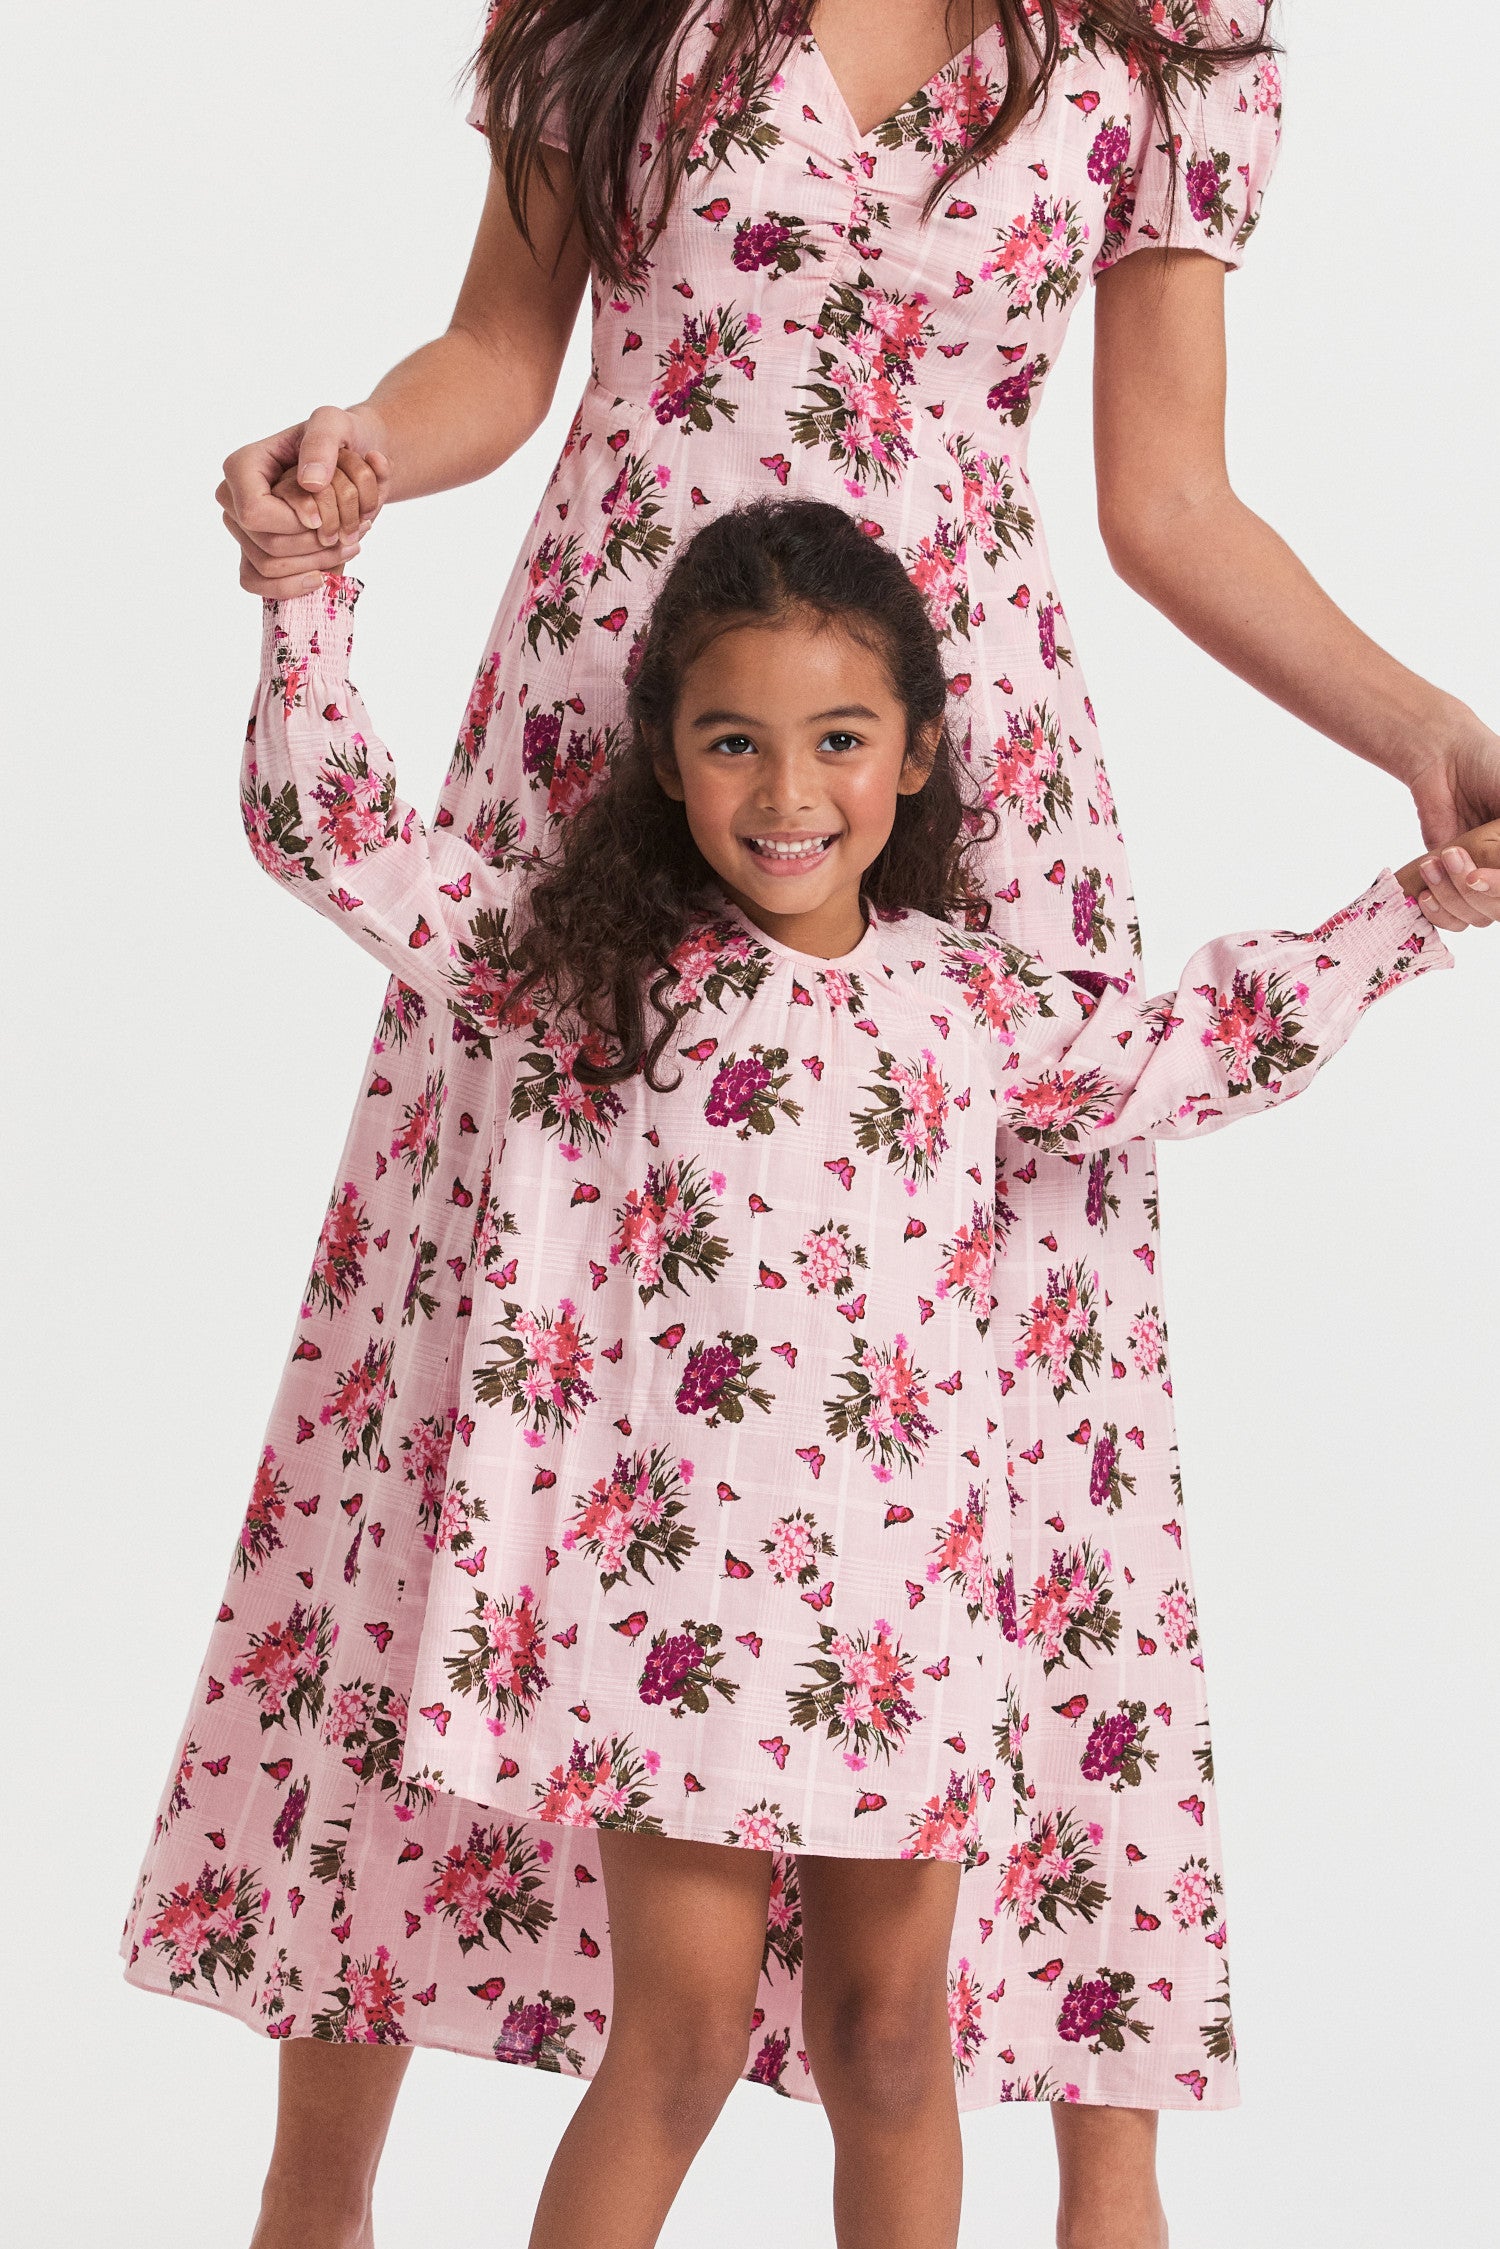 Girls floral pink print dress with long-sleeves.